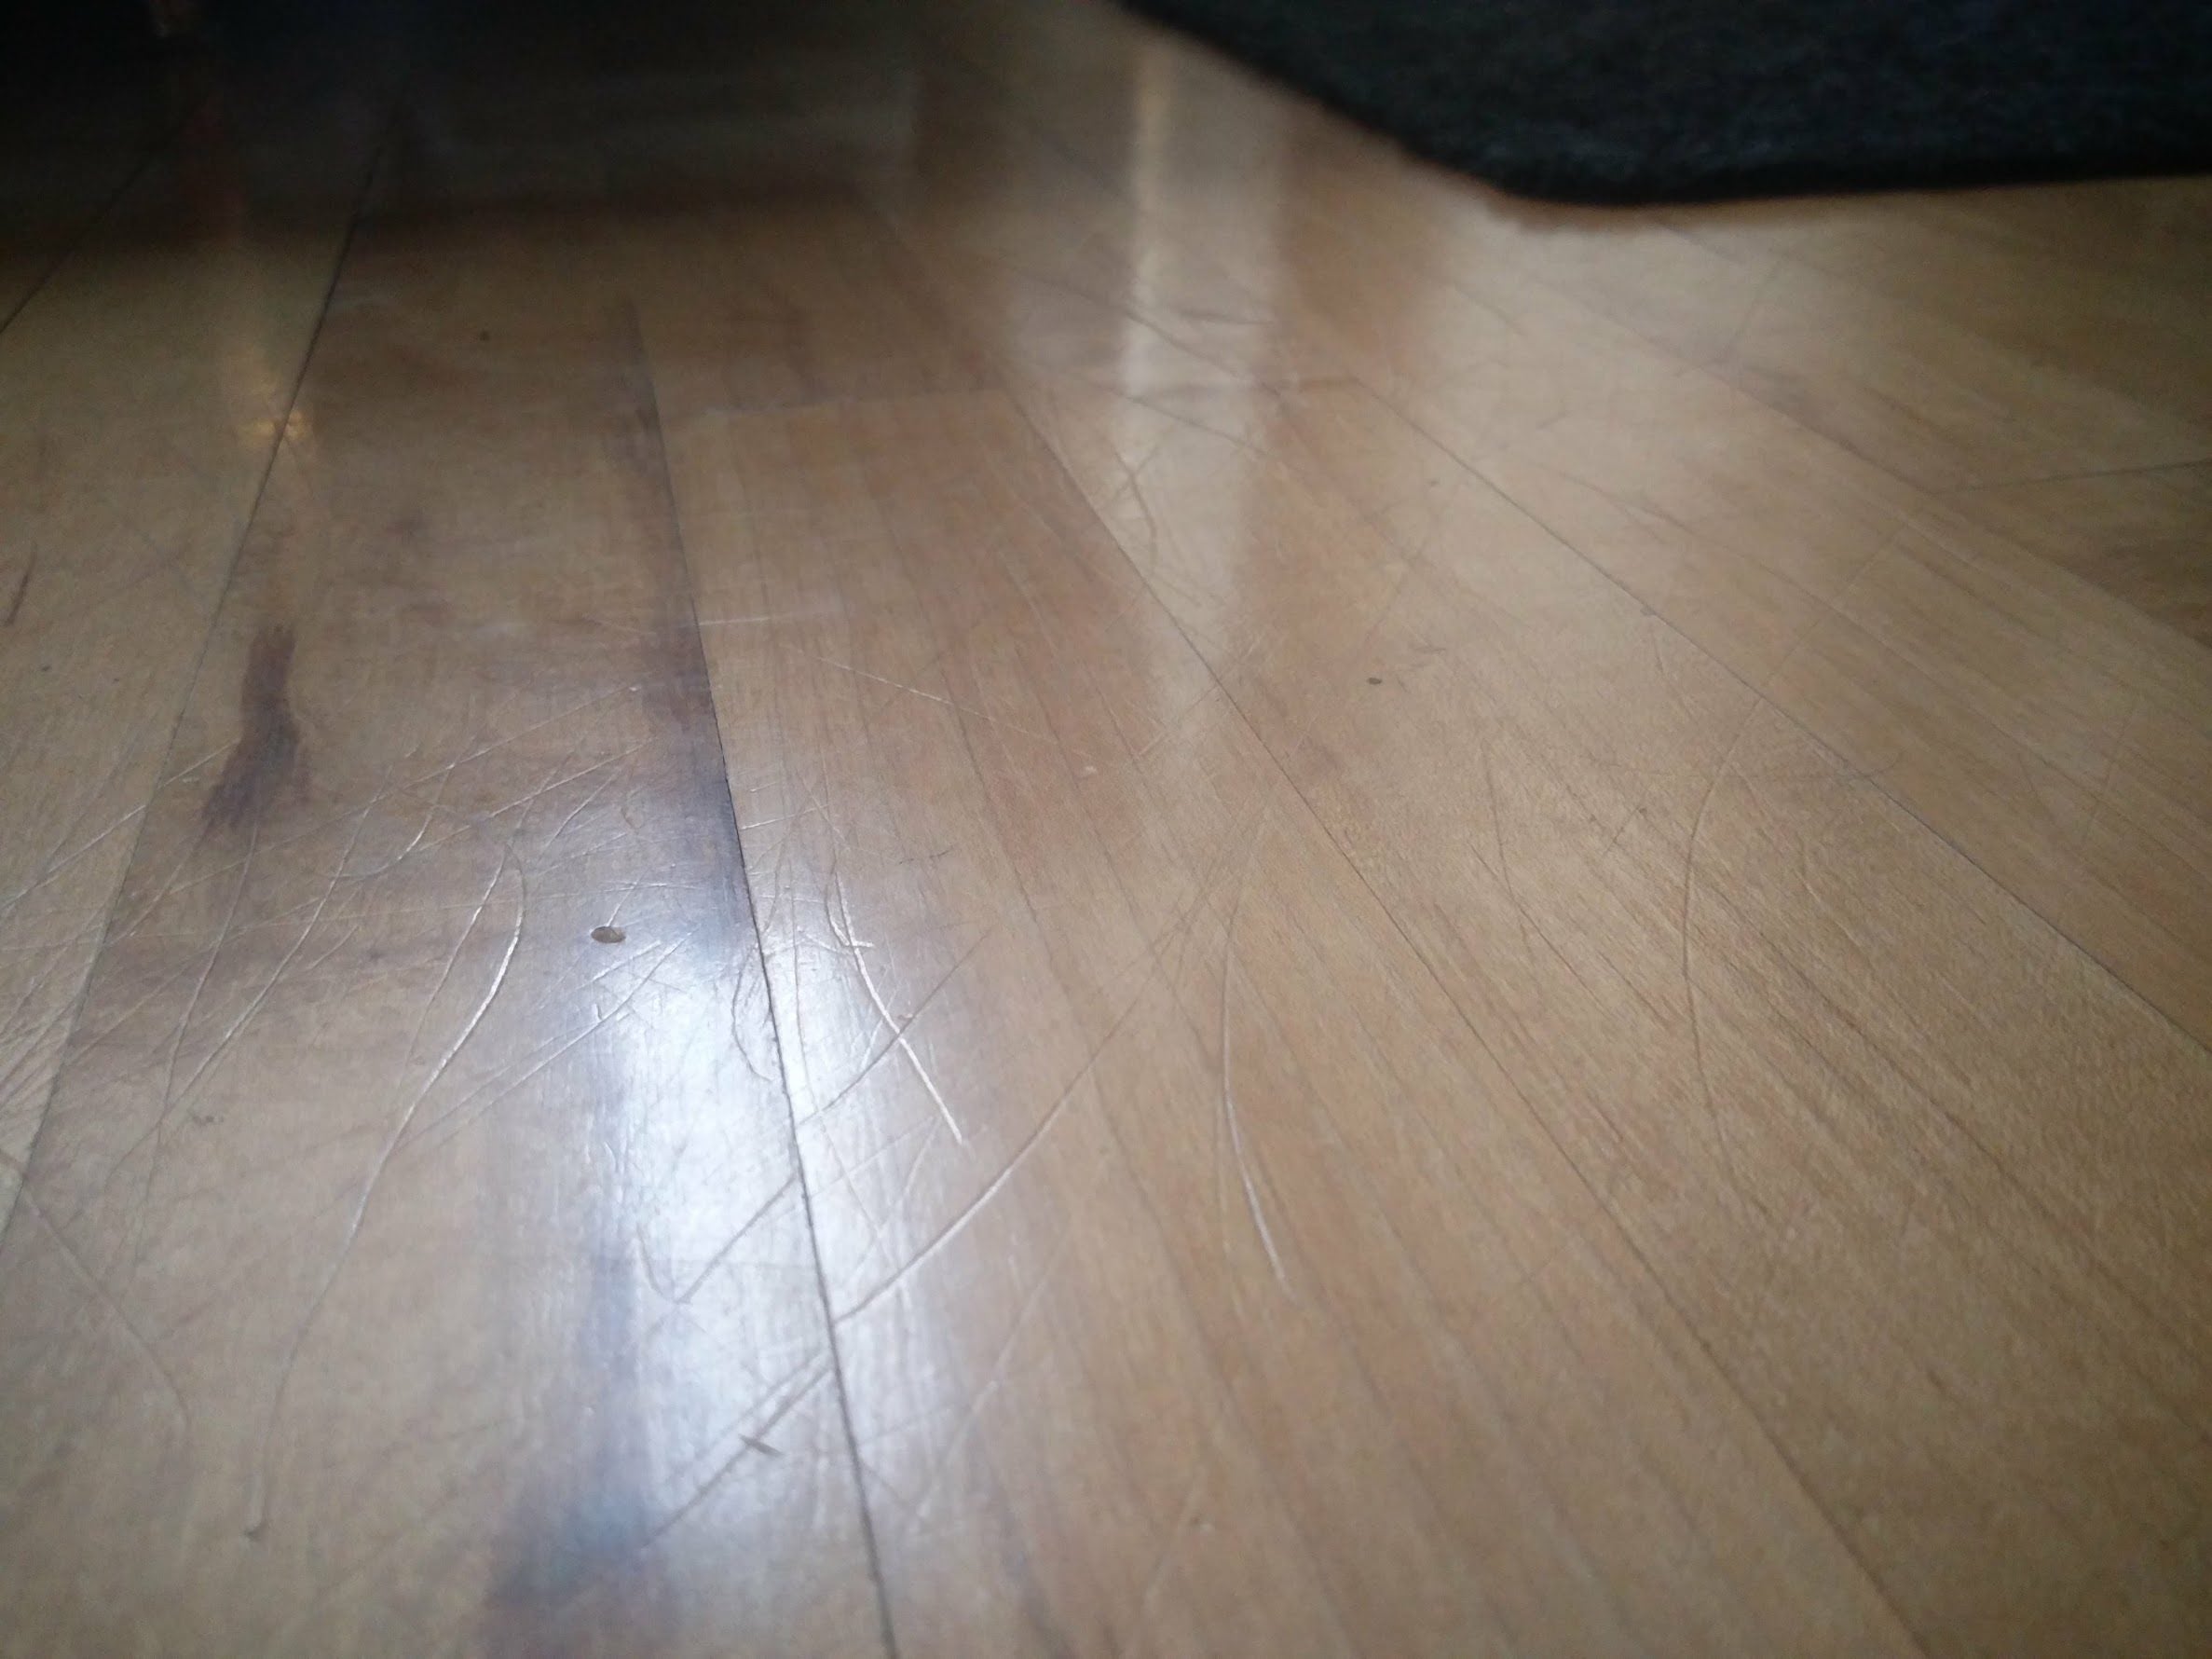 Remove Dog Nail Scratches From Hardwood, Removing Dog Scratches From Hardwood Floors Without Sanding